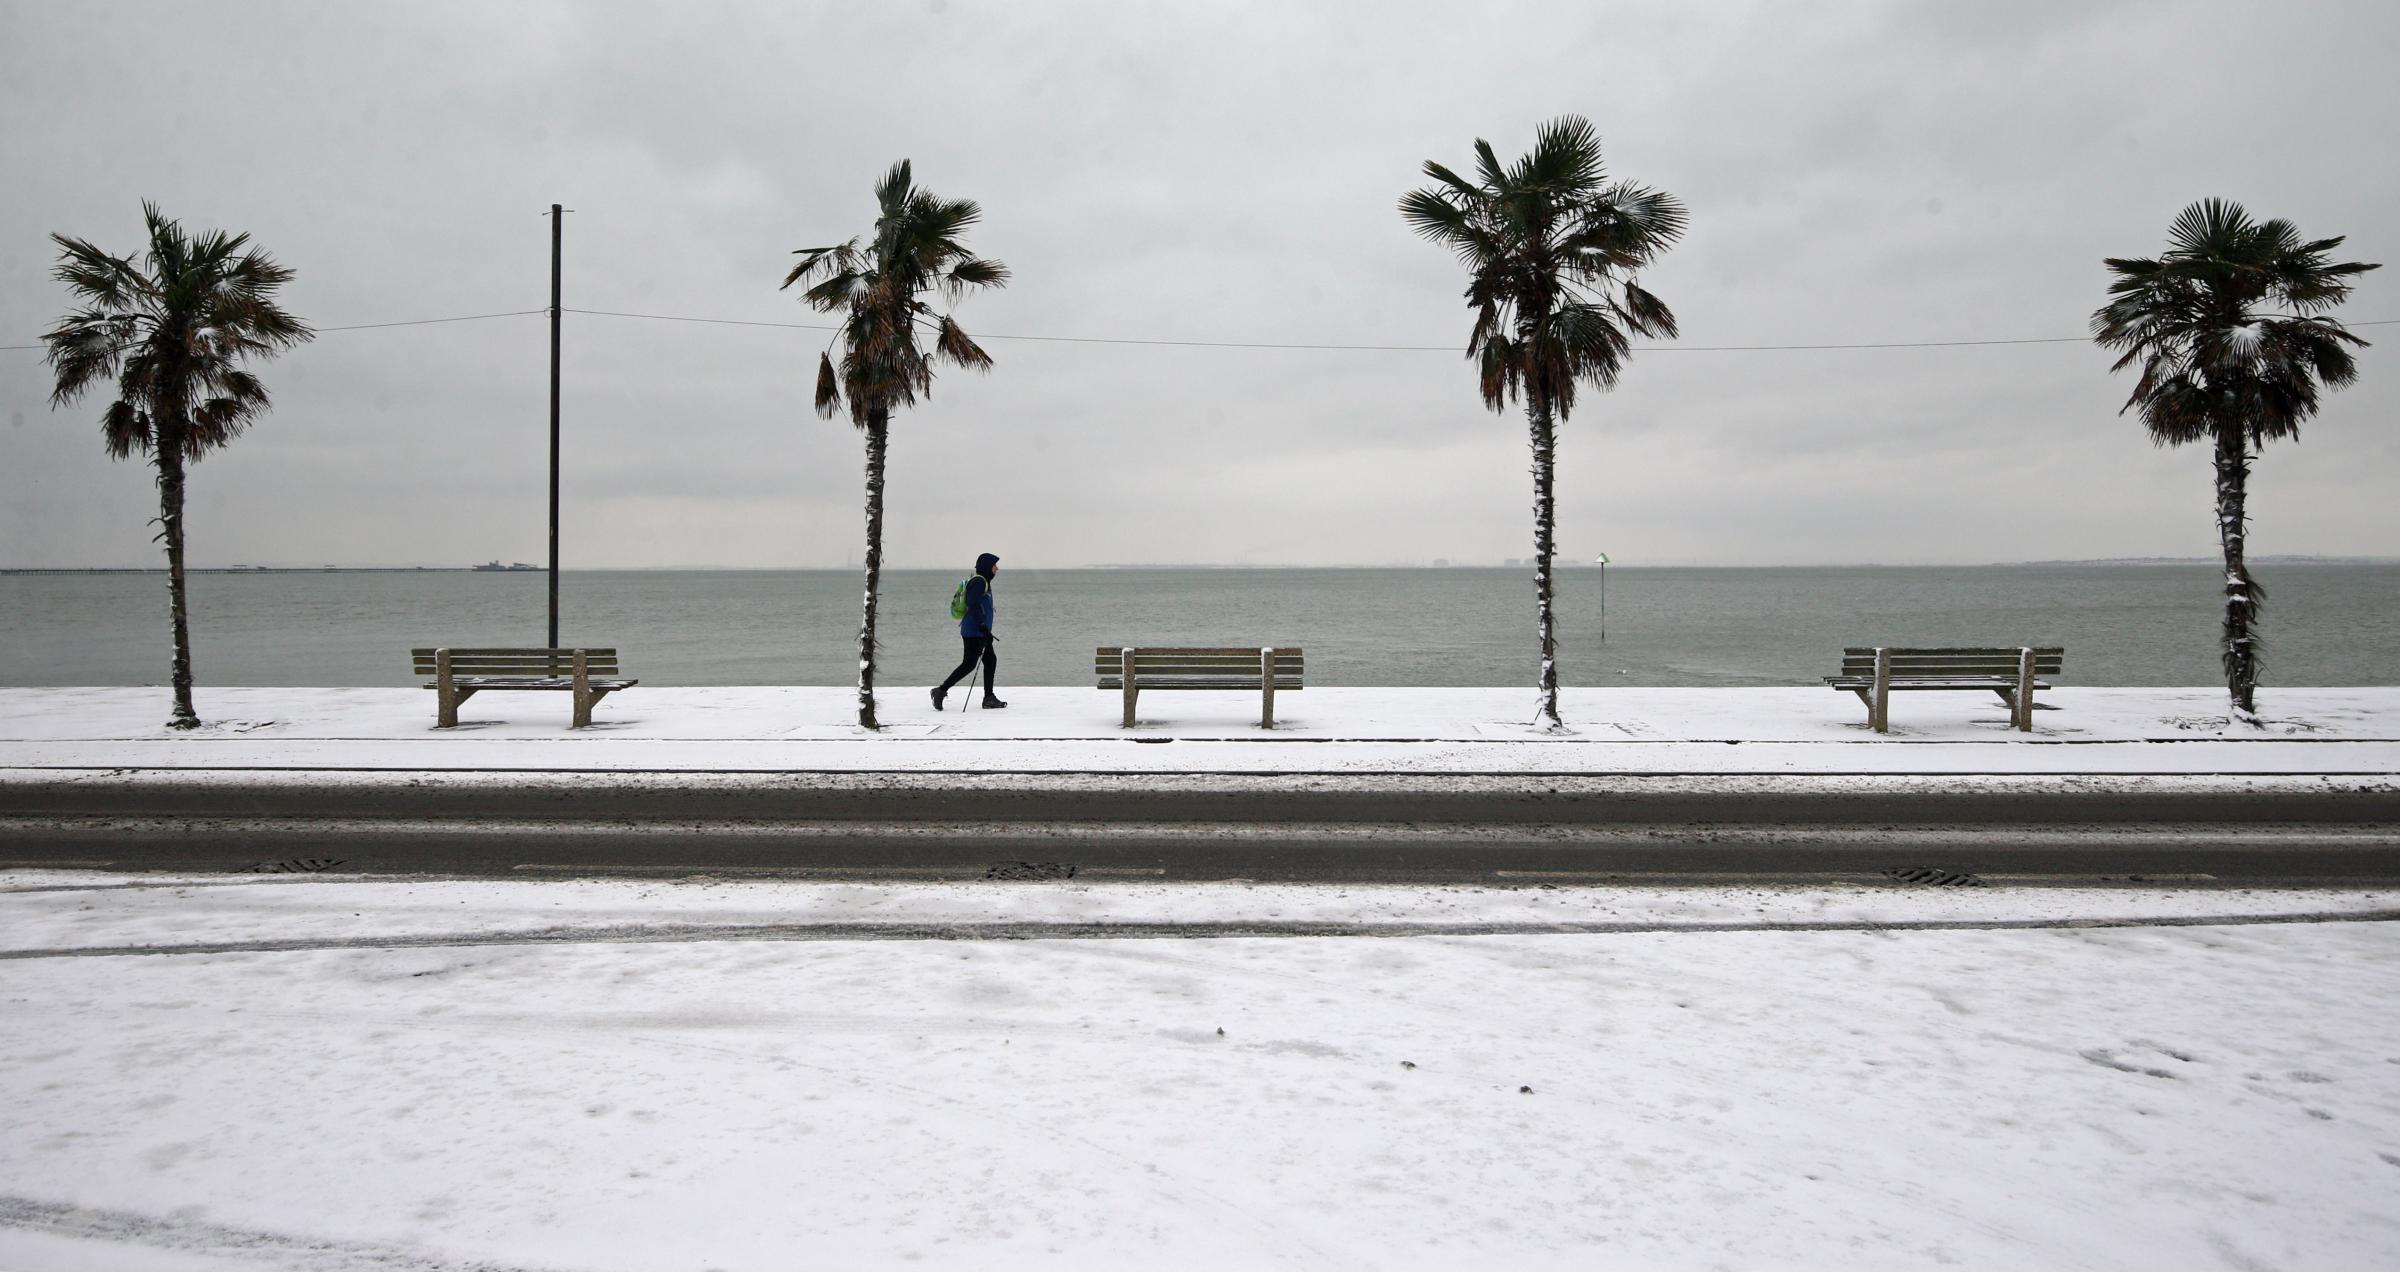 A pedestrian walks past palm trees on the snow-covered seafront at Southend-on-Sea in Essex, after the Met Office issued a severe amber snow warnings for London and south-east England, where heavy snow is likely to cause long delays on roads and with rail